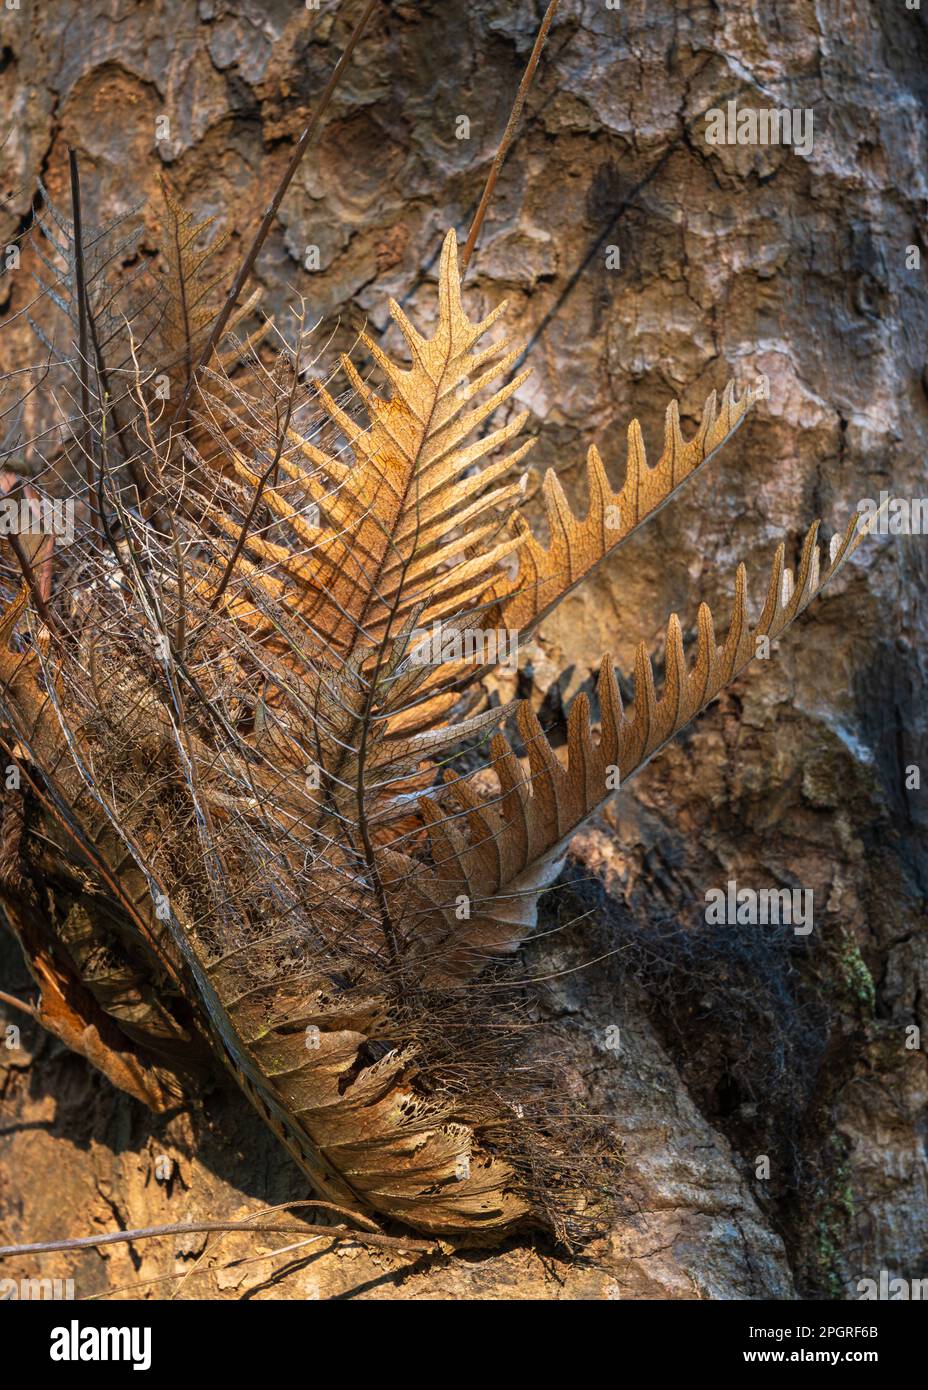 Closeup view in morning sunlight of epiphytic basket fern drynaria rigidula during dry season in Thailand tropical forest Stock Photo